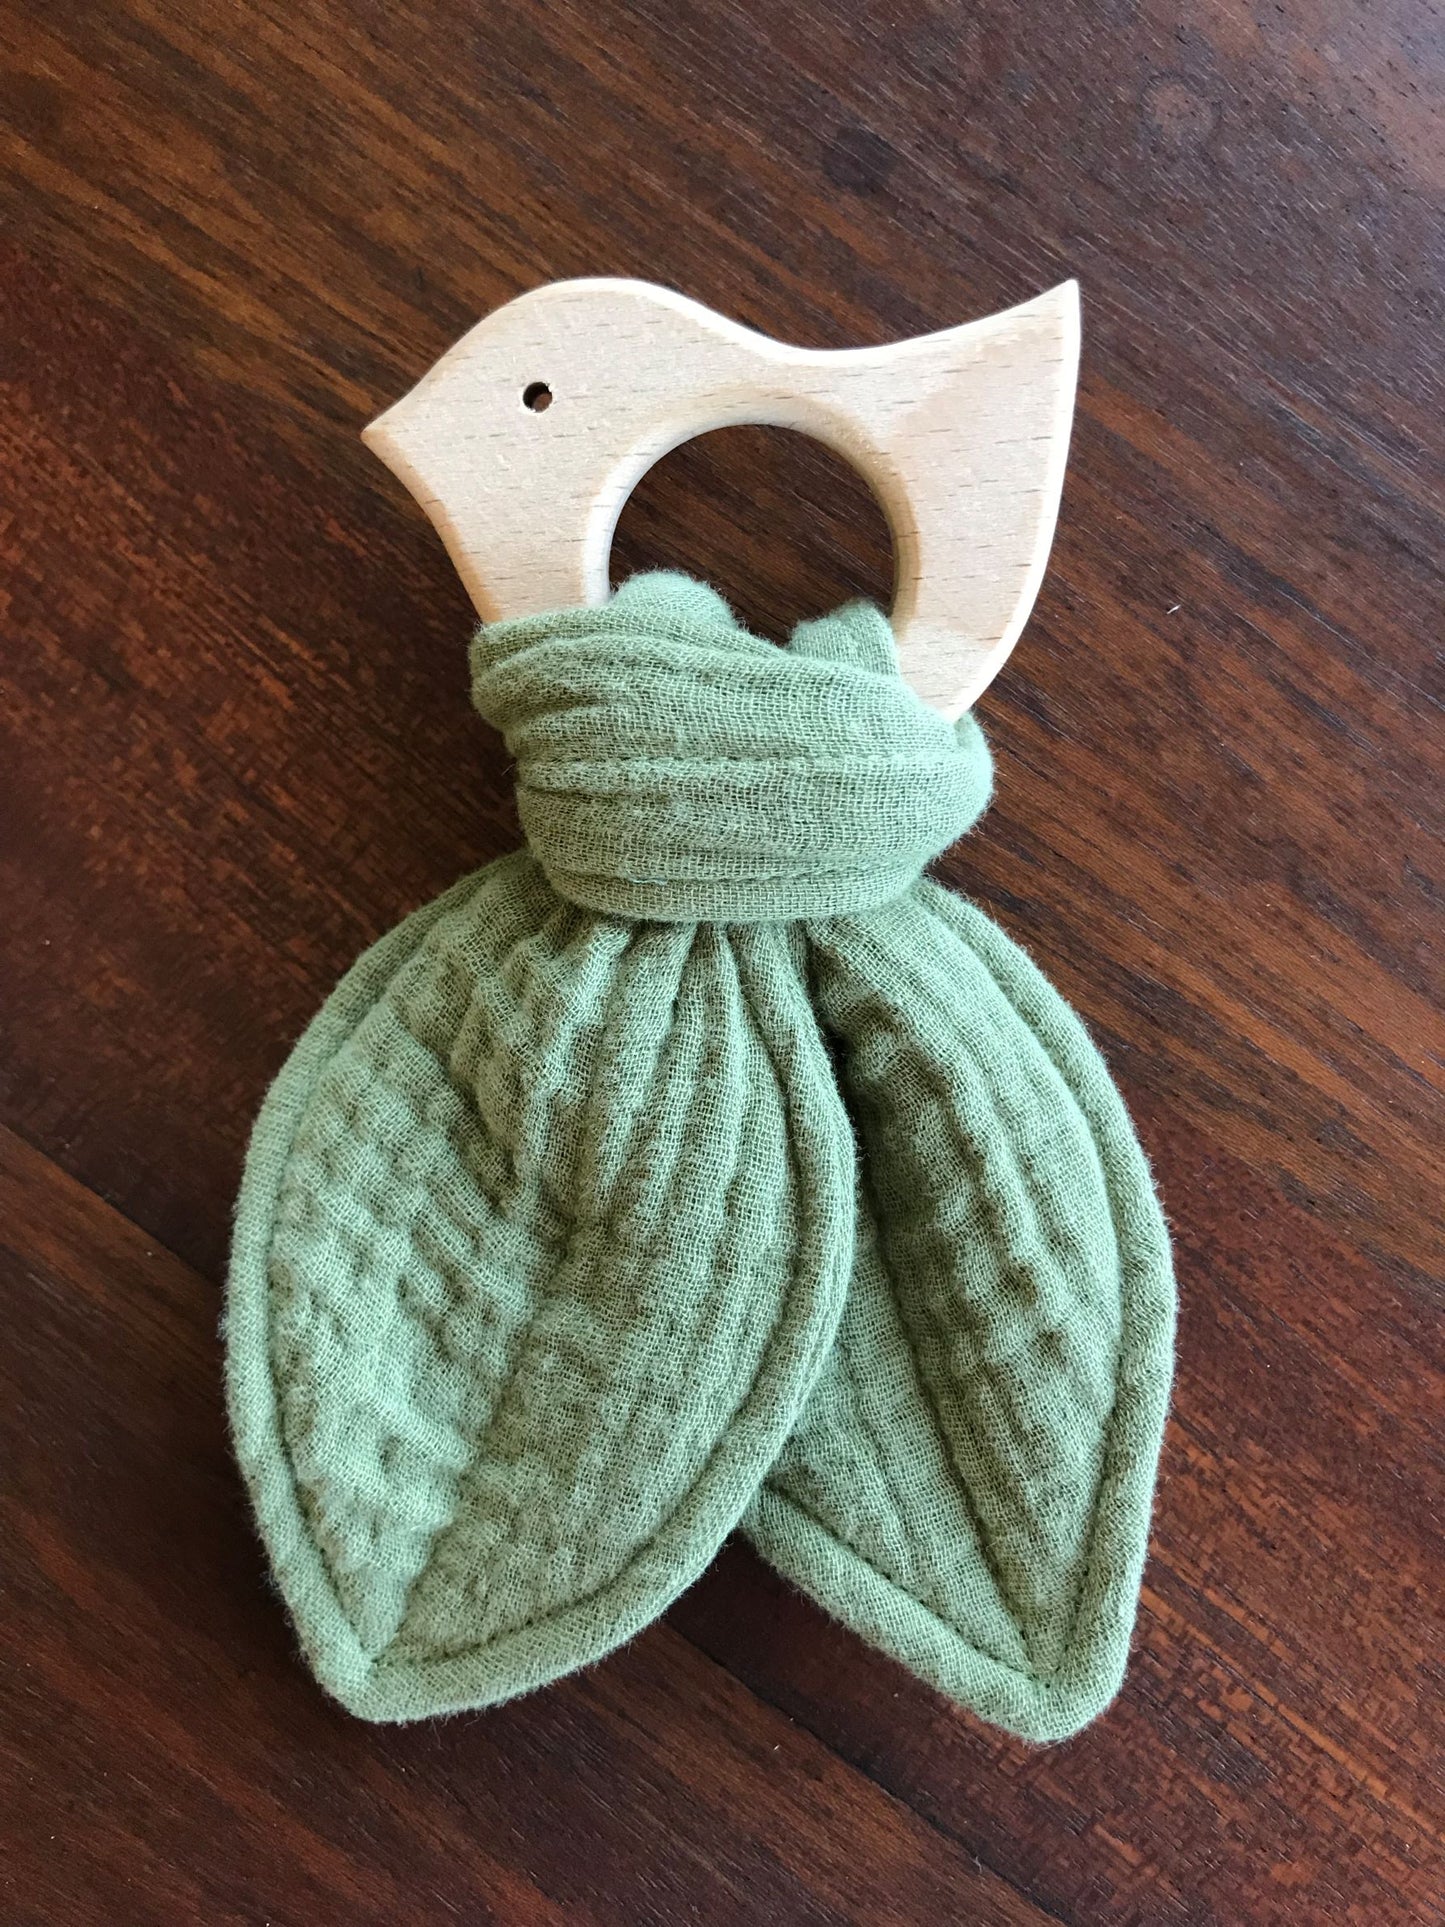 Baby Beech Wood Teether with Organic Cotton Fabric Tie